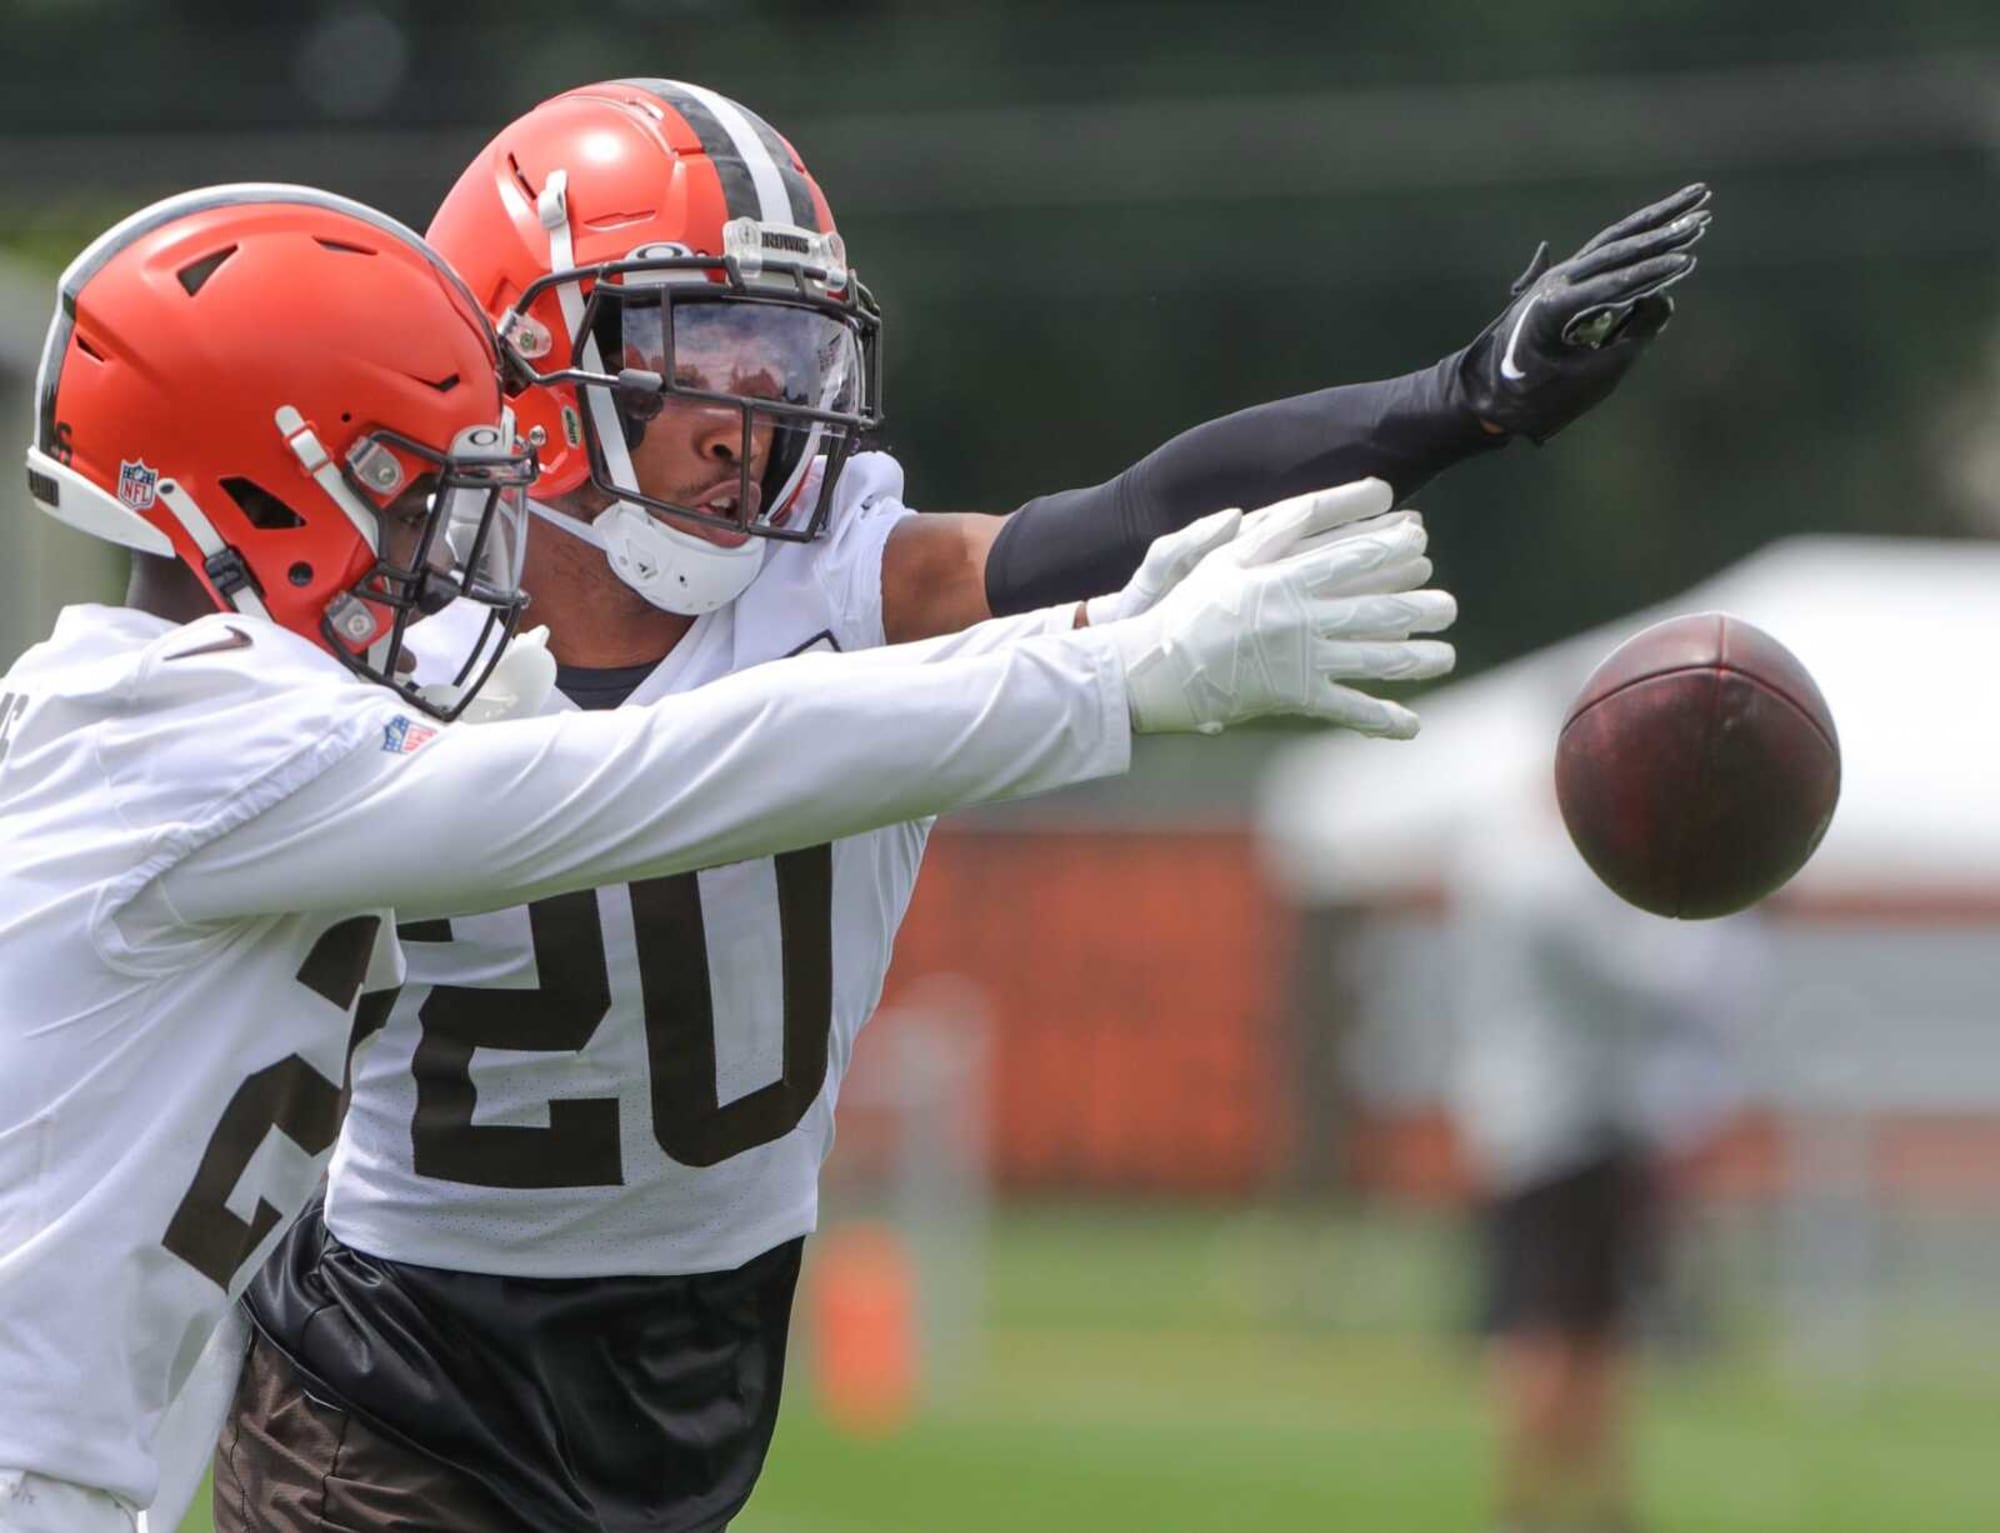 Cleveland Browns shocked fans with their post-praft Power Ranking spot